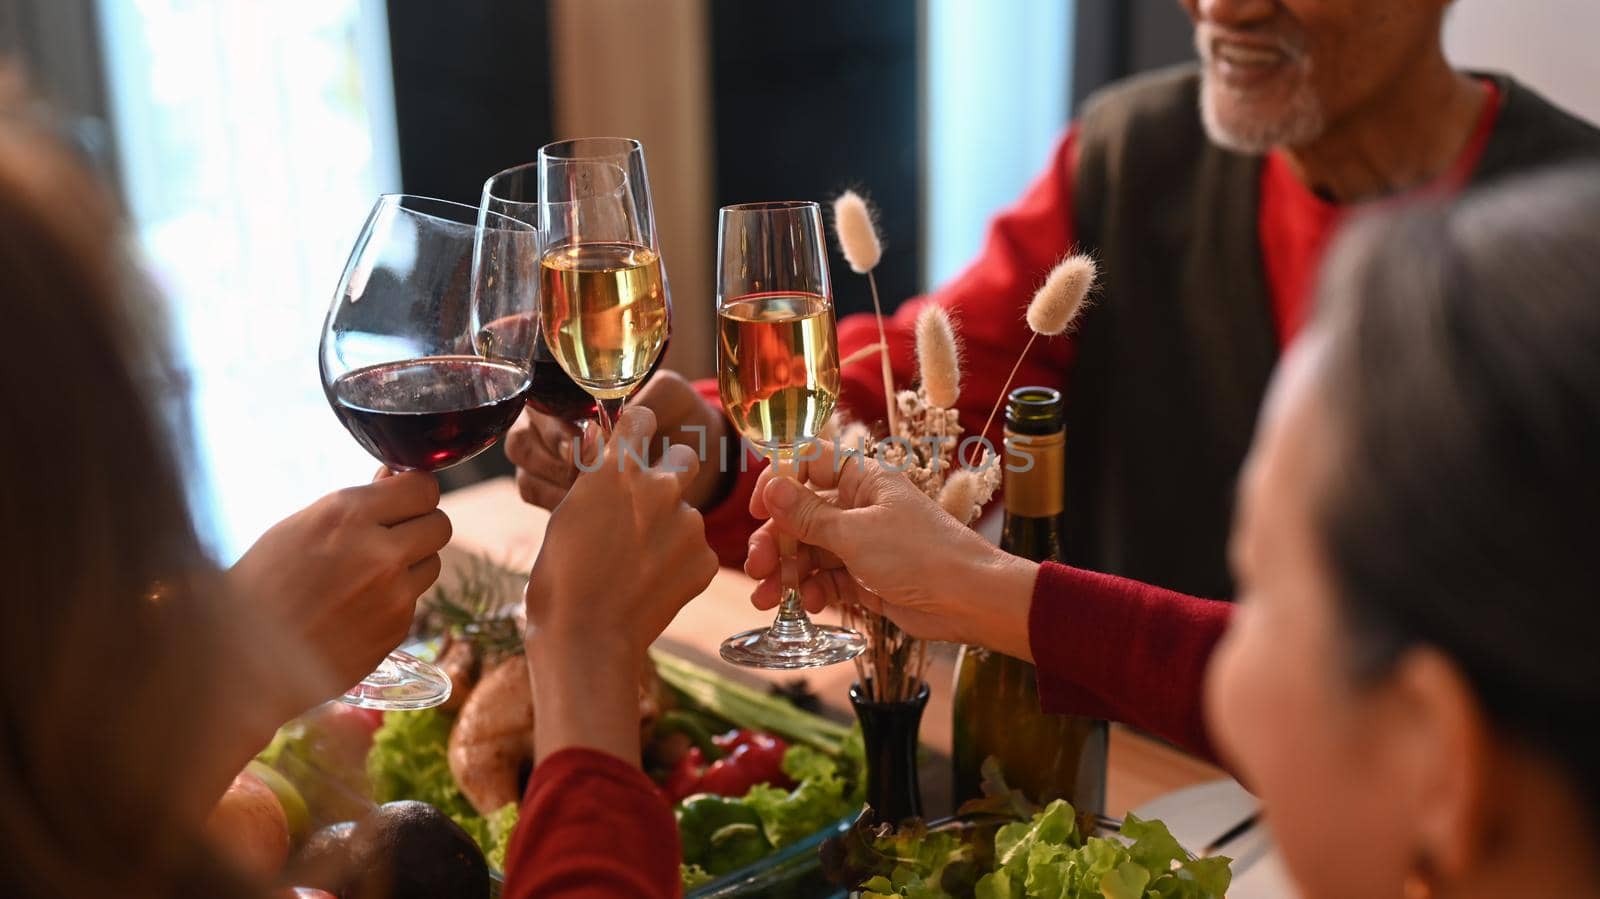 Extended family toasting wine during celebrating Christmas dinner. Holidays and celebration concept.